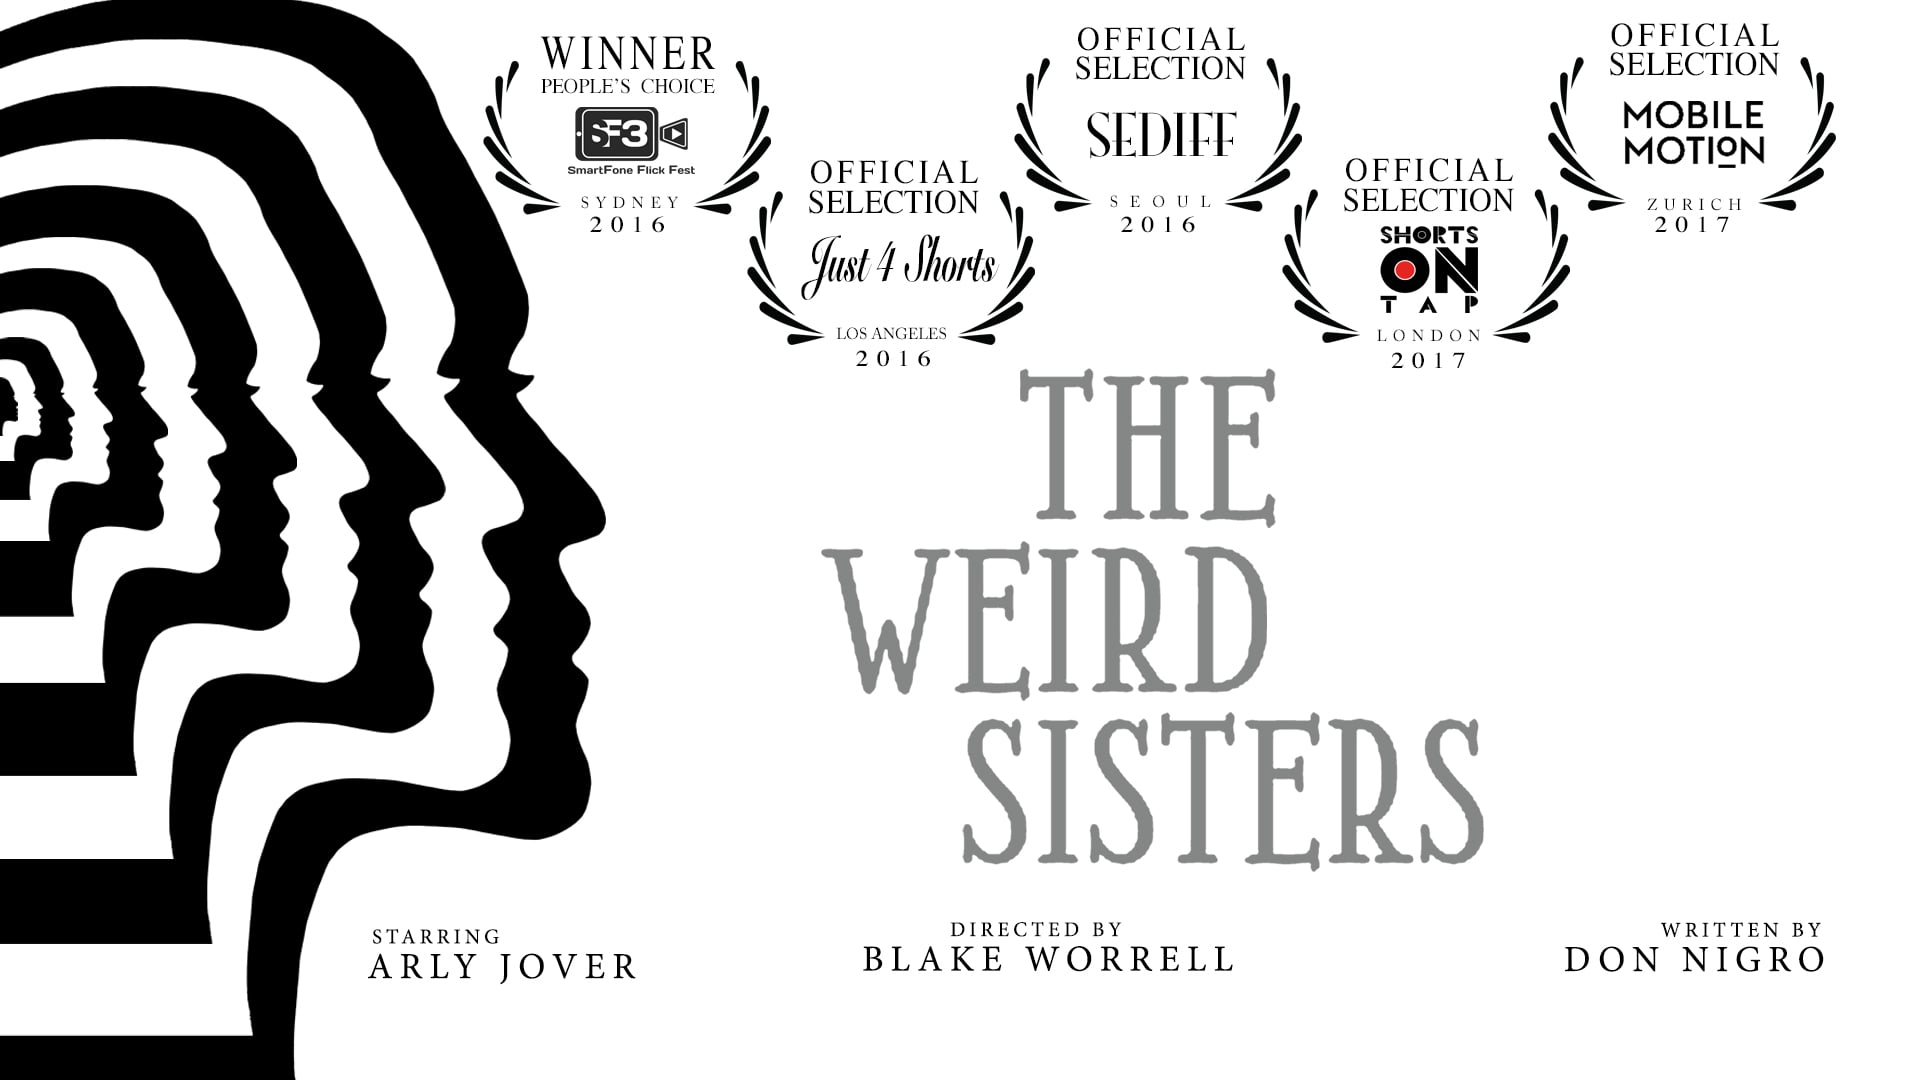 THE WEIRD SISTERS